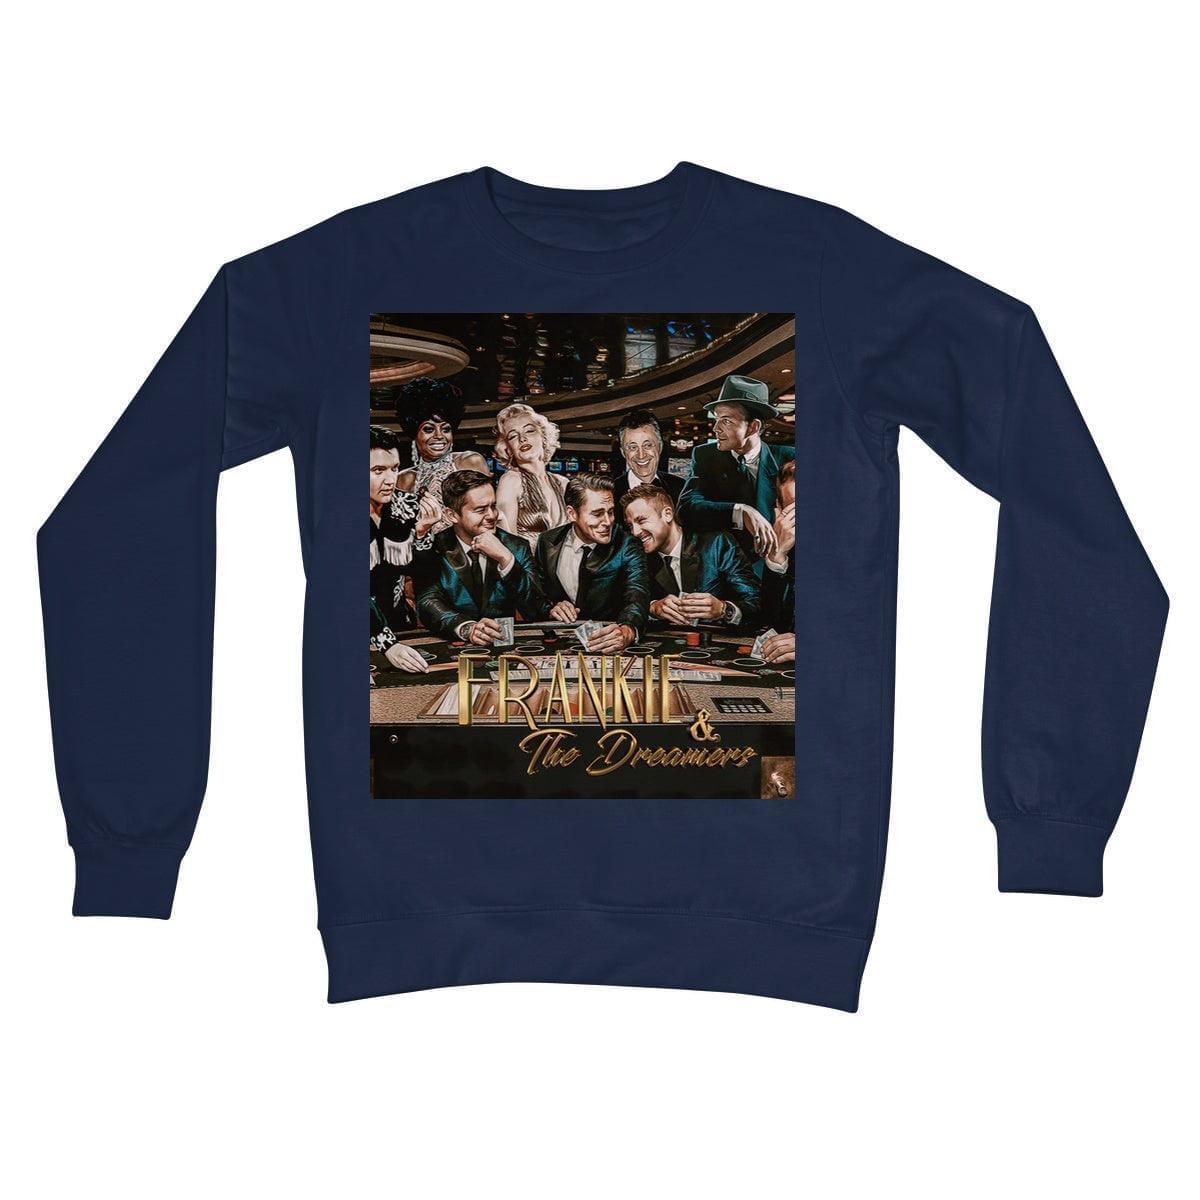 Frankie And The Dreamers Casino 2 Crew Neck Sweatshirt | Apparel Oxford Navy